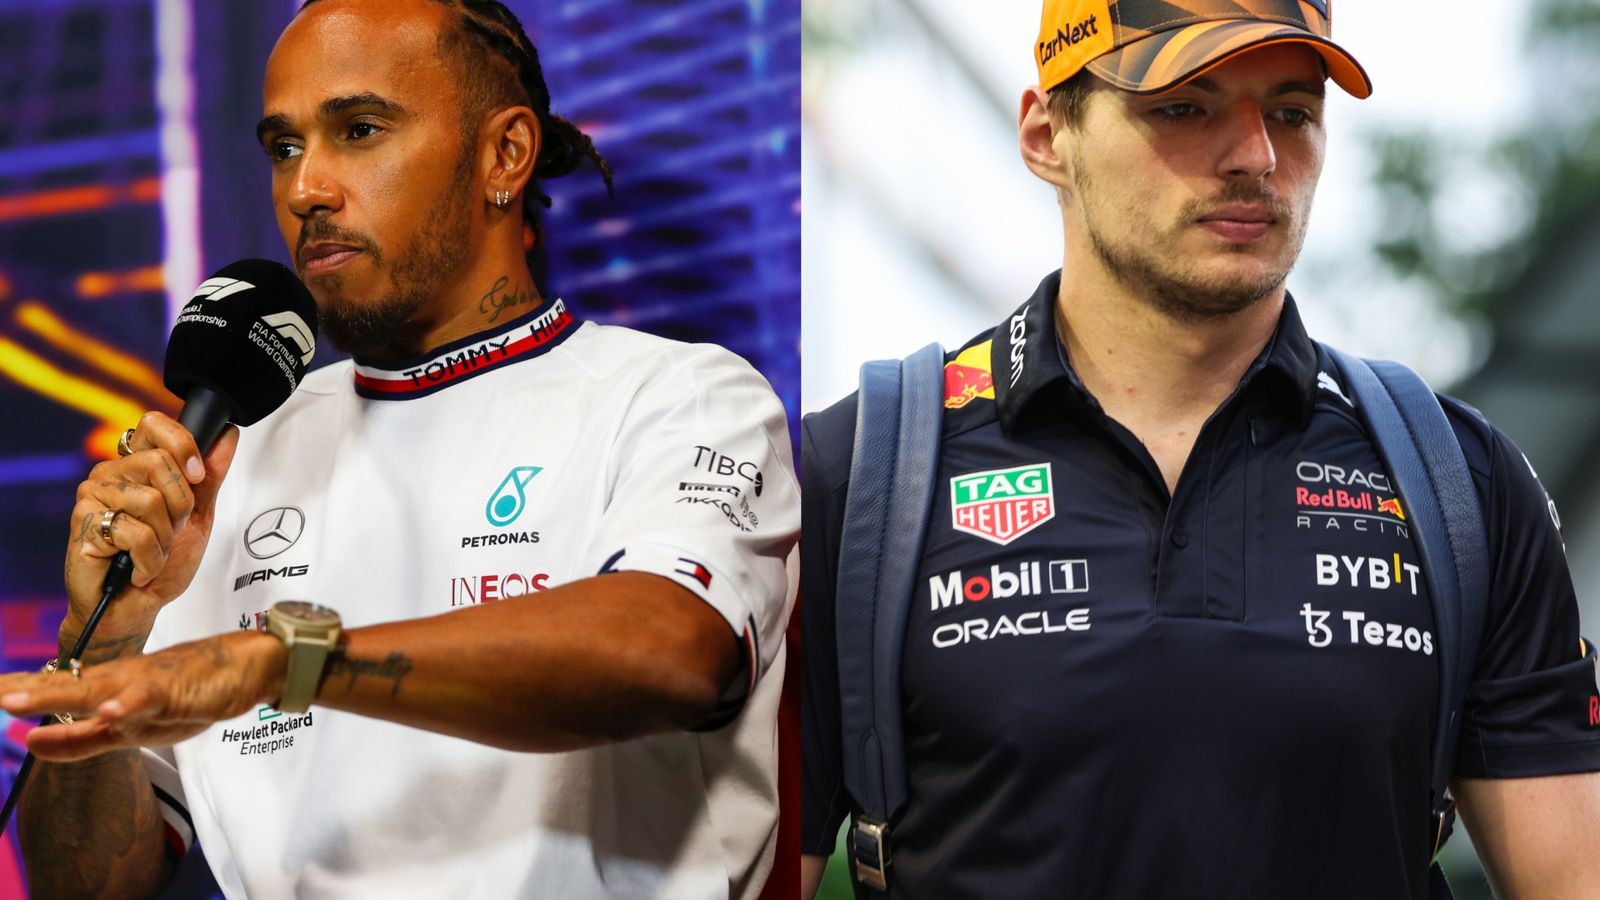 F1 cost cap row: Lewis Hamilton questions Red Bull's 2021 upgrades | 'Transparency always essential'